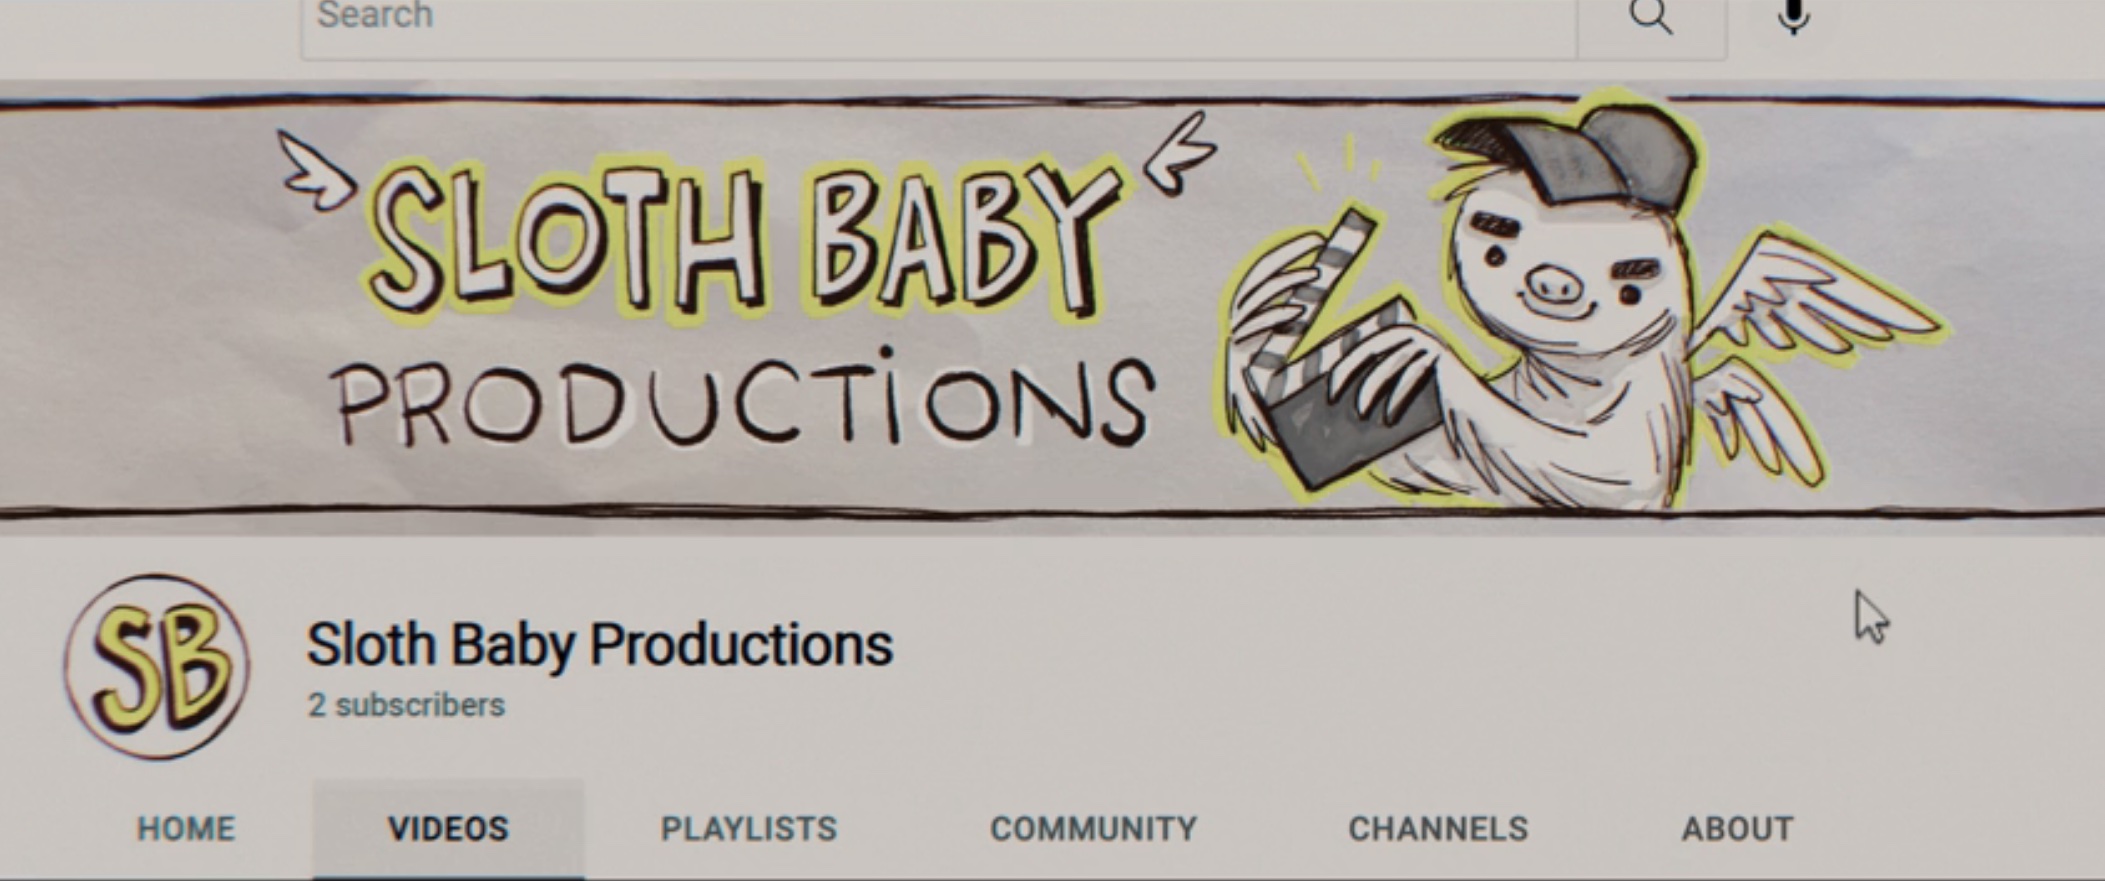 Sloth Baby Productions